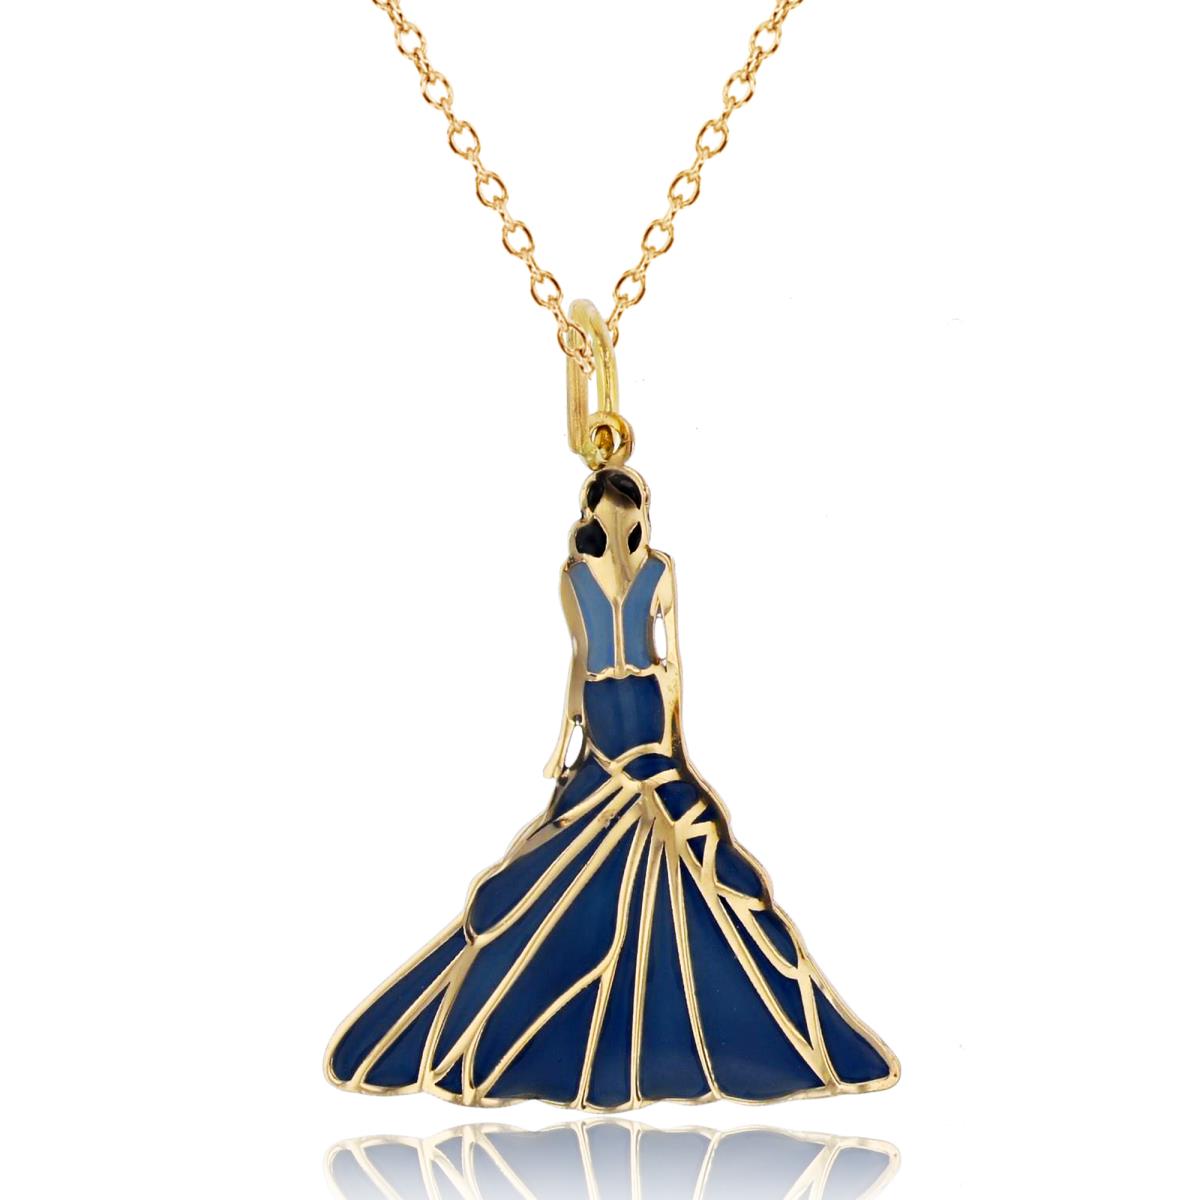 14K Yellow Gold Enamel Gown Lady 28x20mm 18" 020 Rolo Necklace